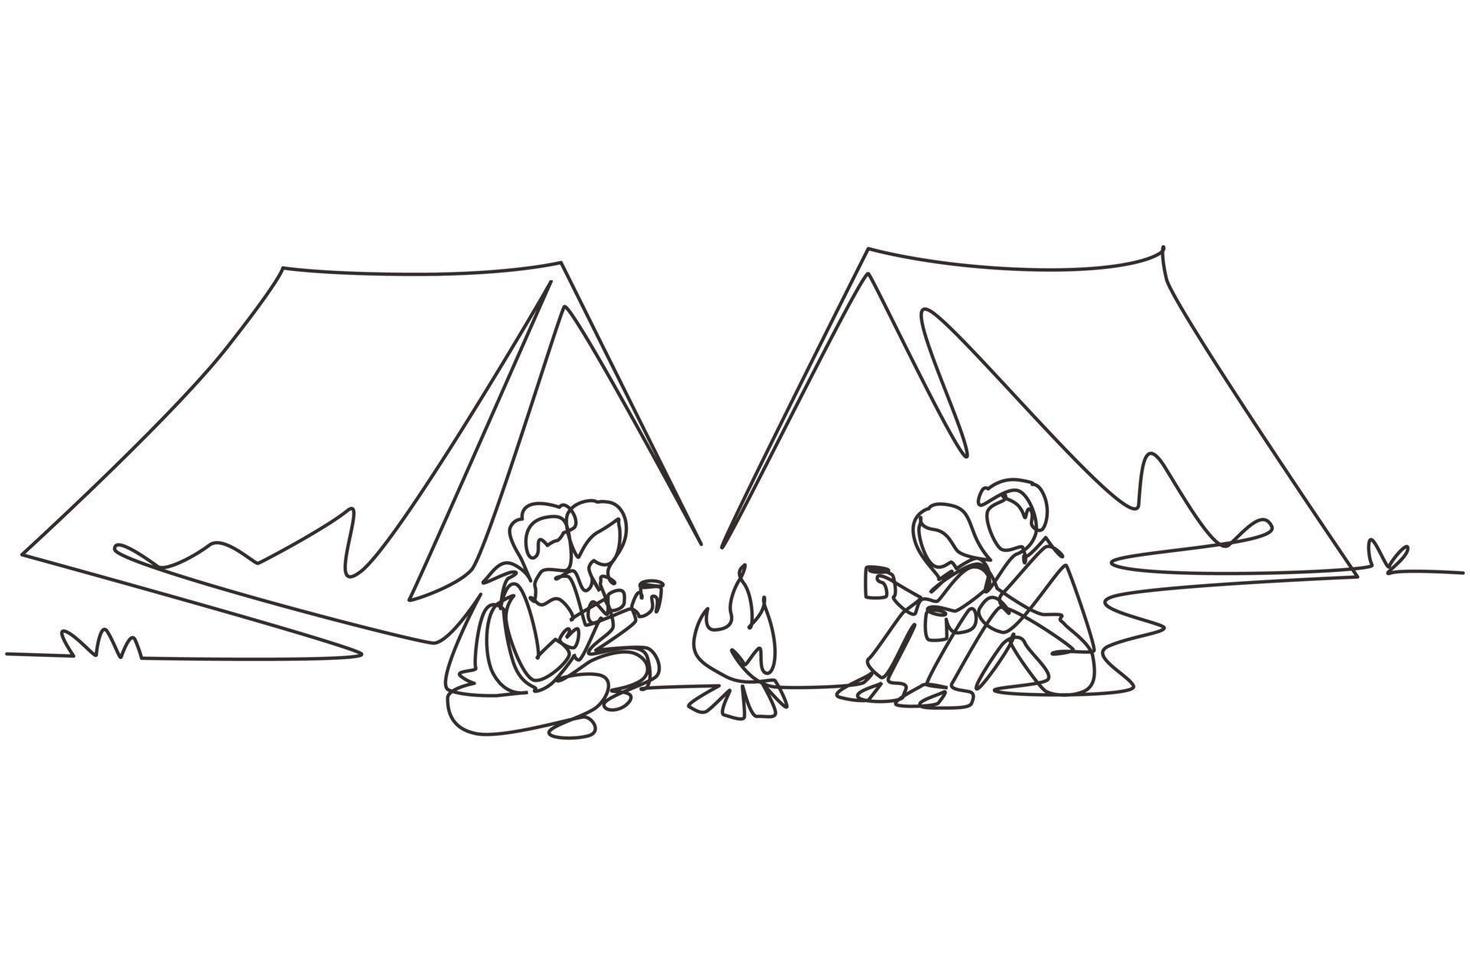 Single one line drawing two couple camping around campfire tents. Group of people sitting on ground, drinking hot tea, man playing guitar, getting warm near bonfire. Continuous line draw design vector